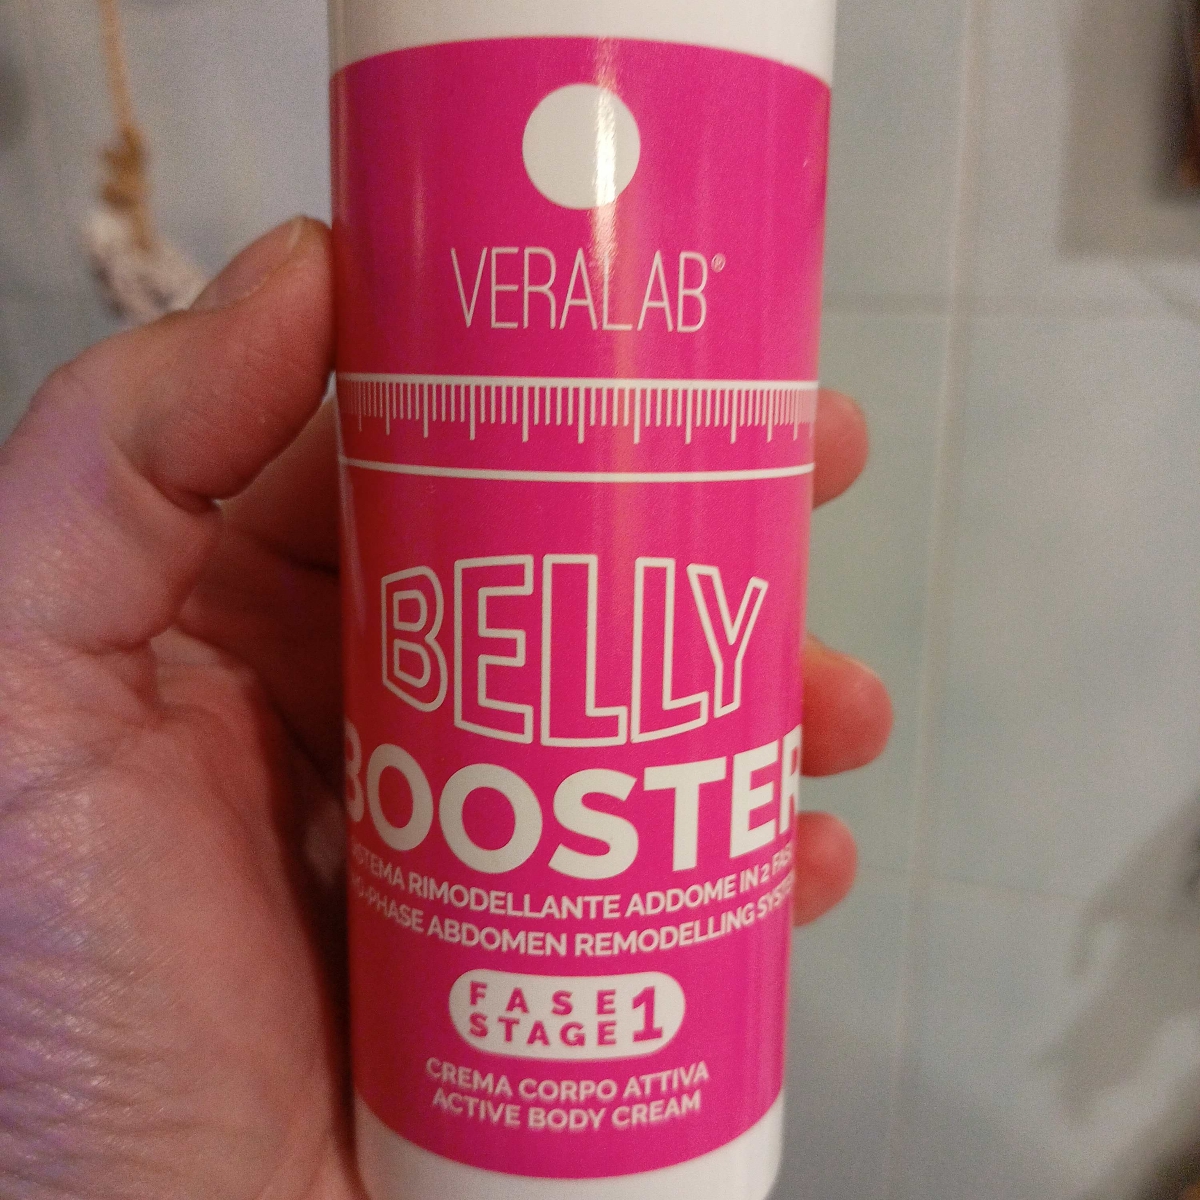 Veralab Belly Booster Review | abillion